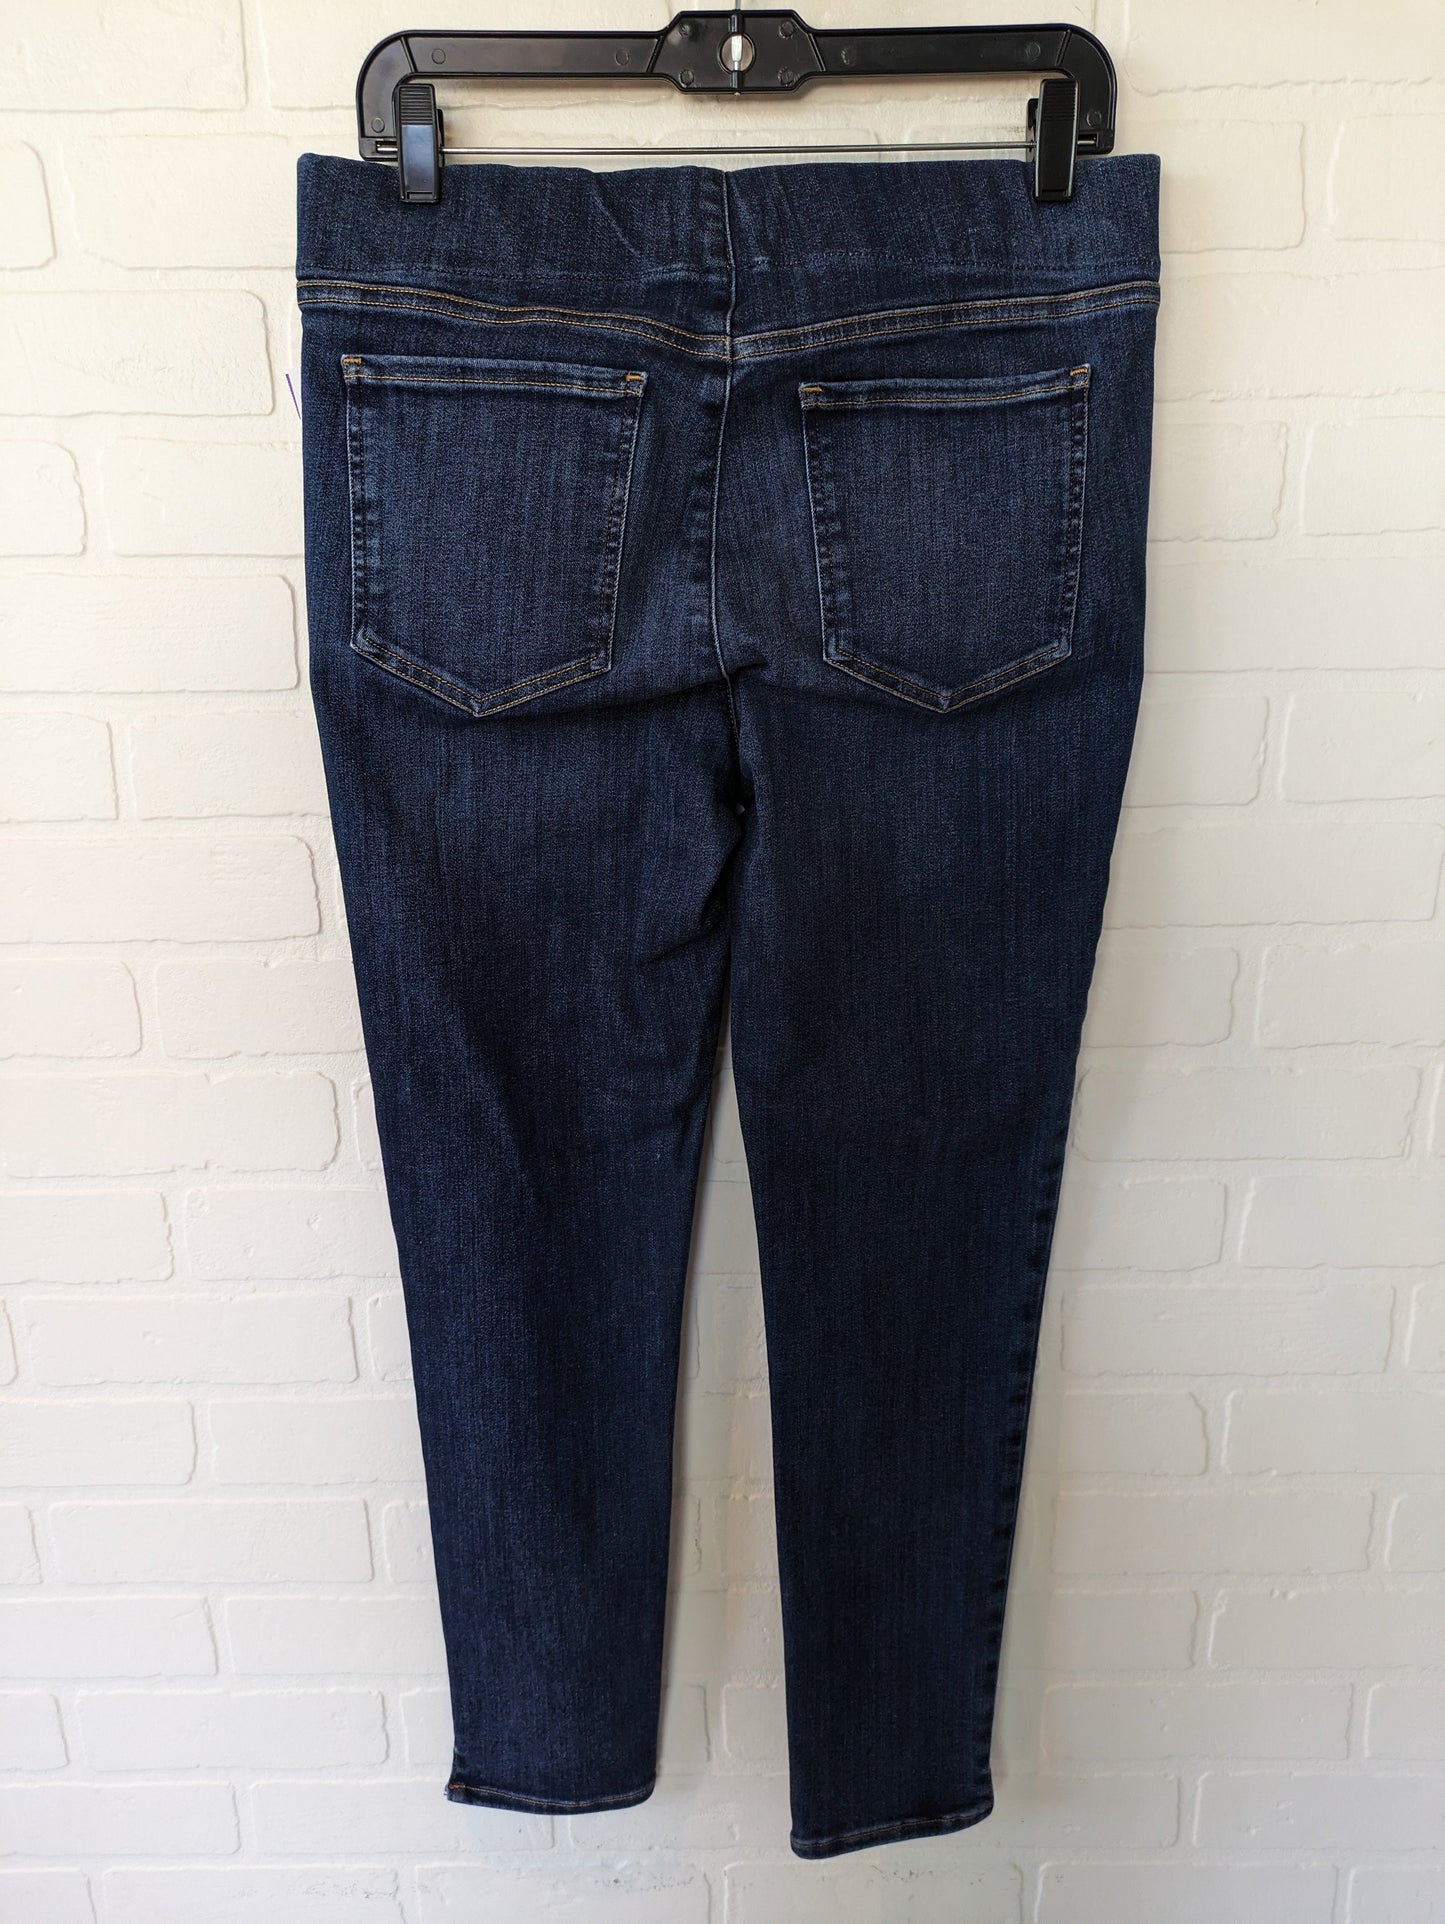 Blue Denim Jeans Jeggings Not Your Daughters Jeans, Size 12